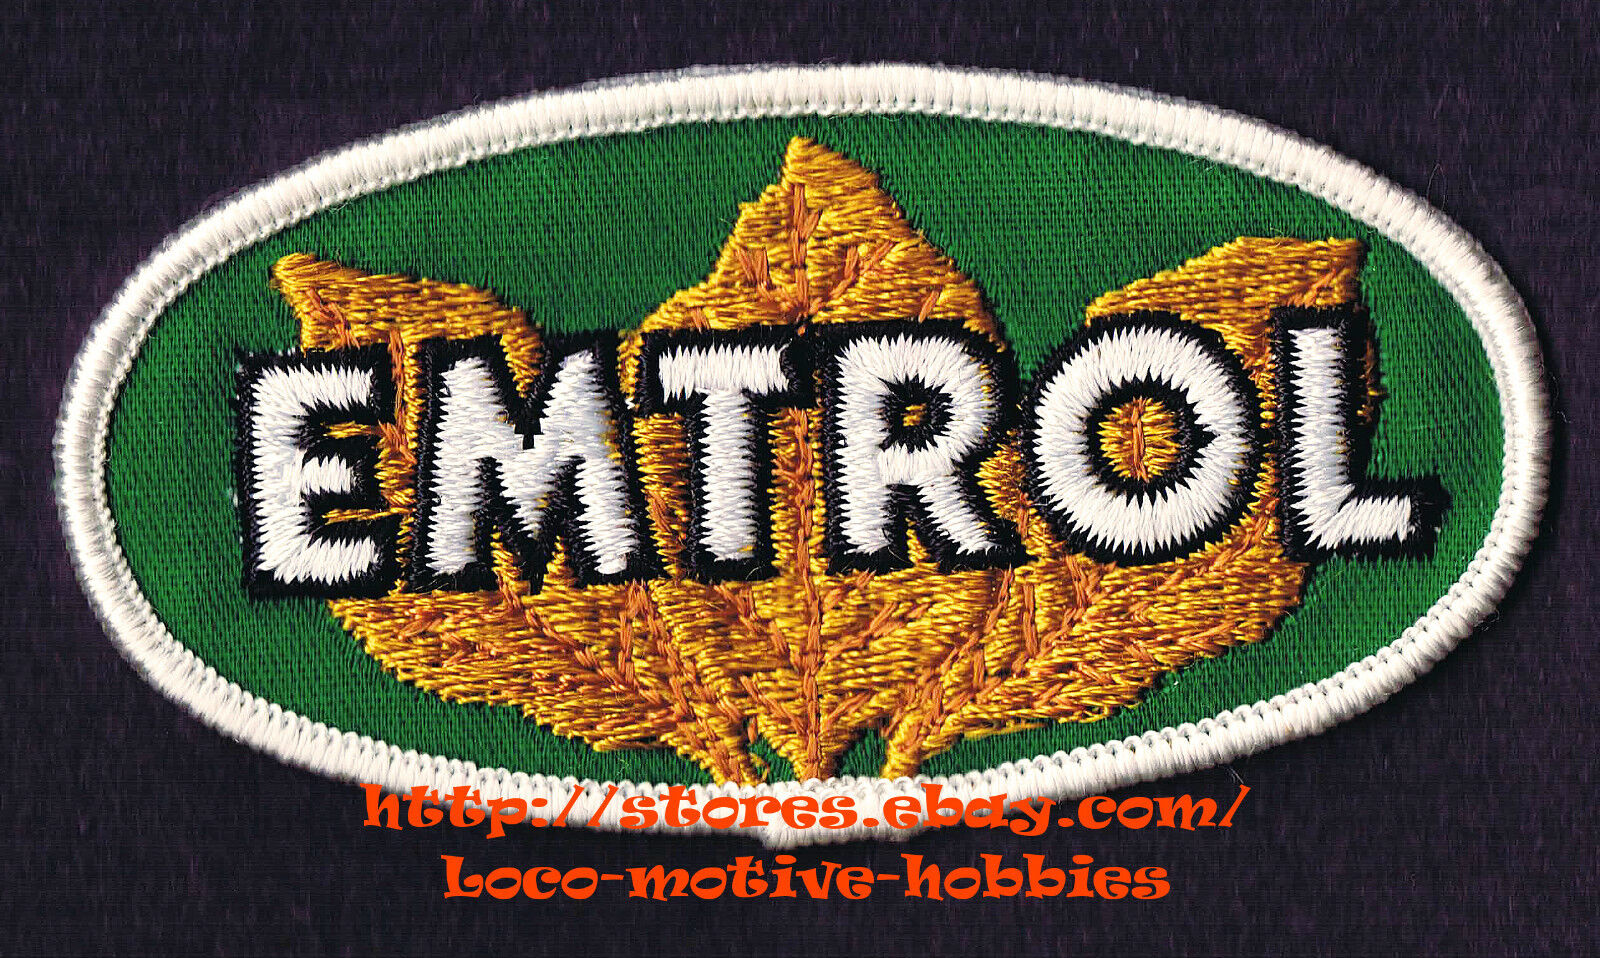 LMH Patch  EMTROL  BIO-BASED MOTOR OIL Lubricants  Soy Based & Corn Products